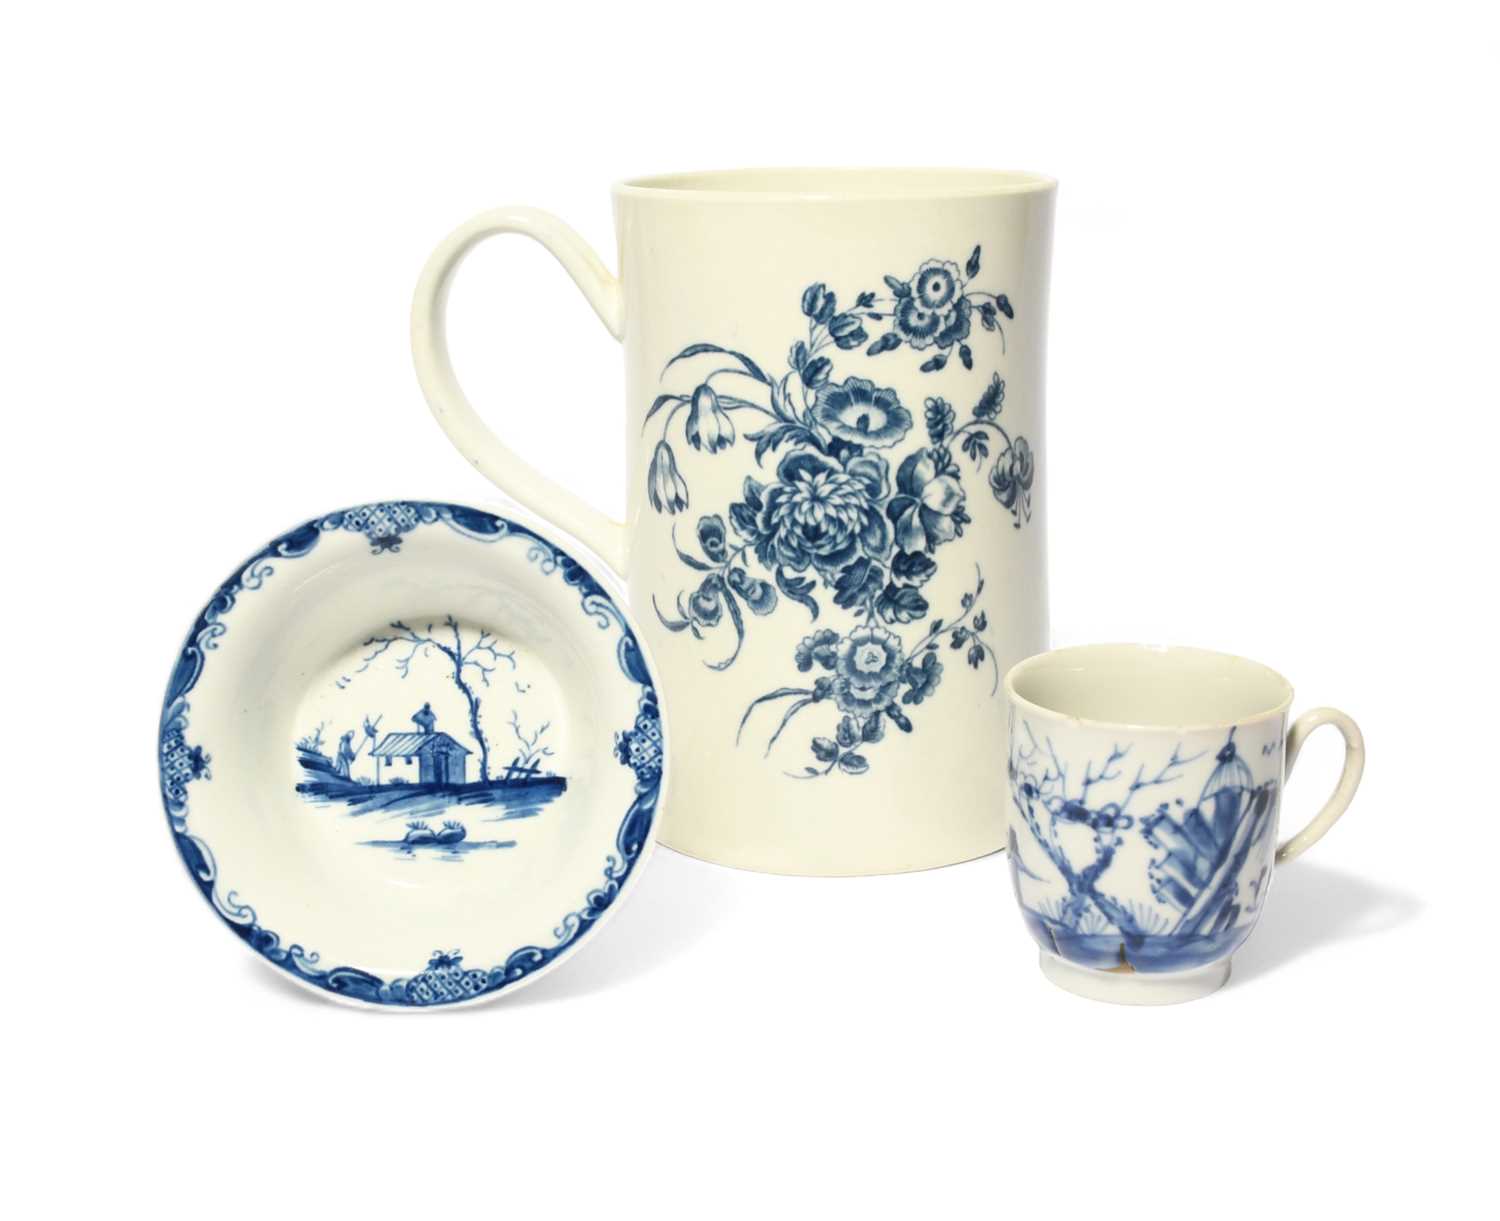 A Worcester blue and white patty pan and a mug , c.1760- 70, the patty pan painted with the Bare